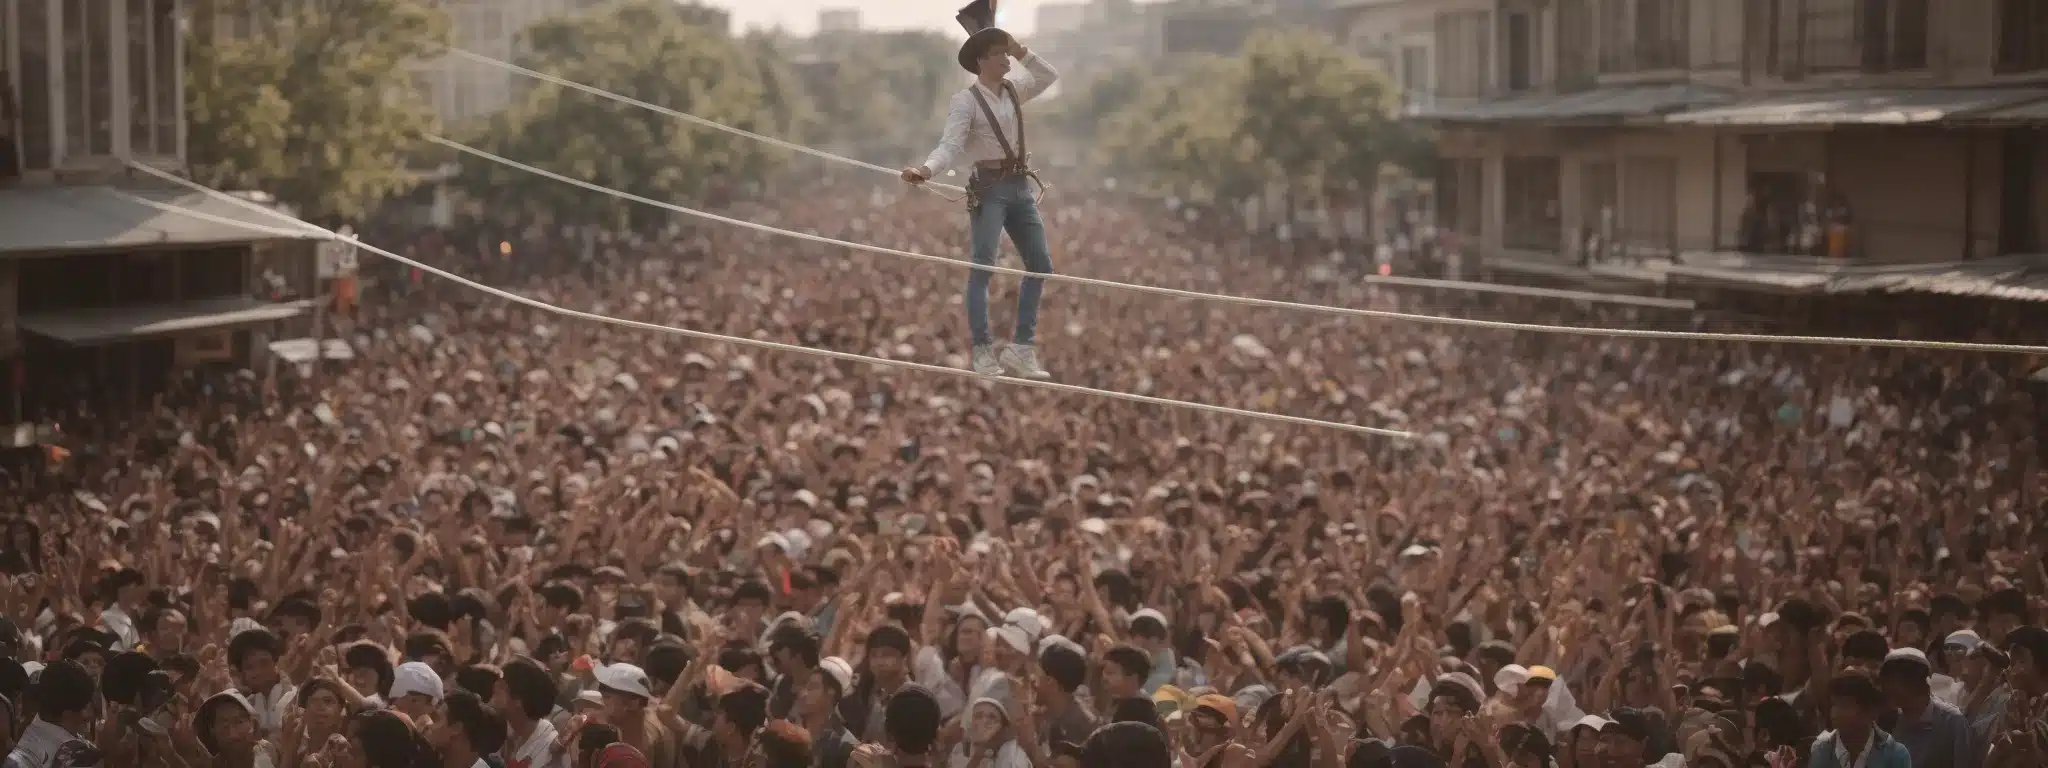 A Tightrope Walker Balances Delicately High Above A Cheering Crowd, Symbolizing The Precision Needed In Local Backlink Acquisition.